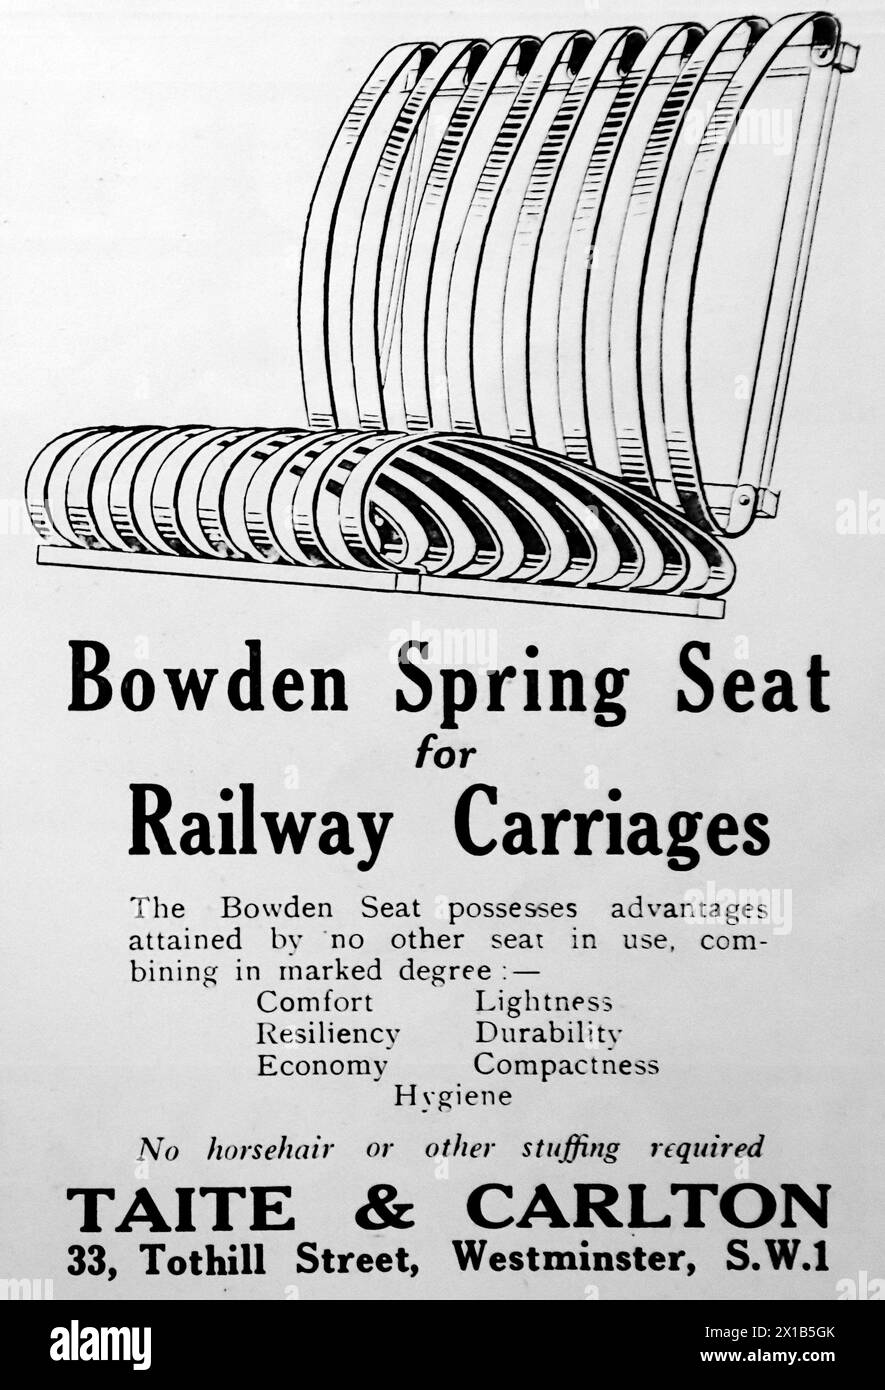 Advertisement for Taite and Carlton of Westminster, London. Bowden Spring Seat for railway carriages. From an original publication dated 15 May 1924, this helps to give an insight into public transport, and the railways in particular, of the 1920s. Stock Photo